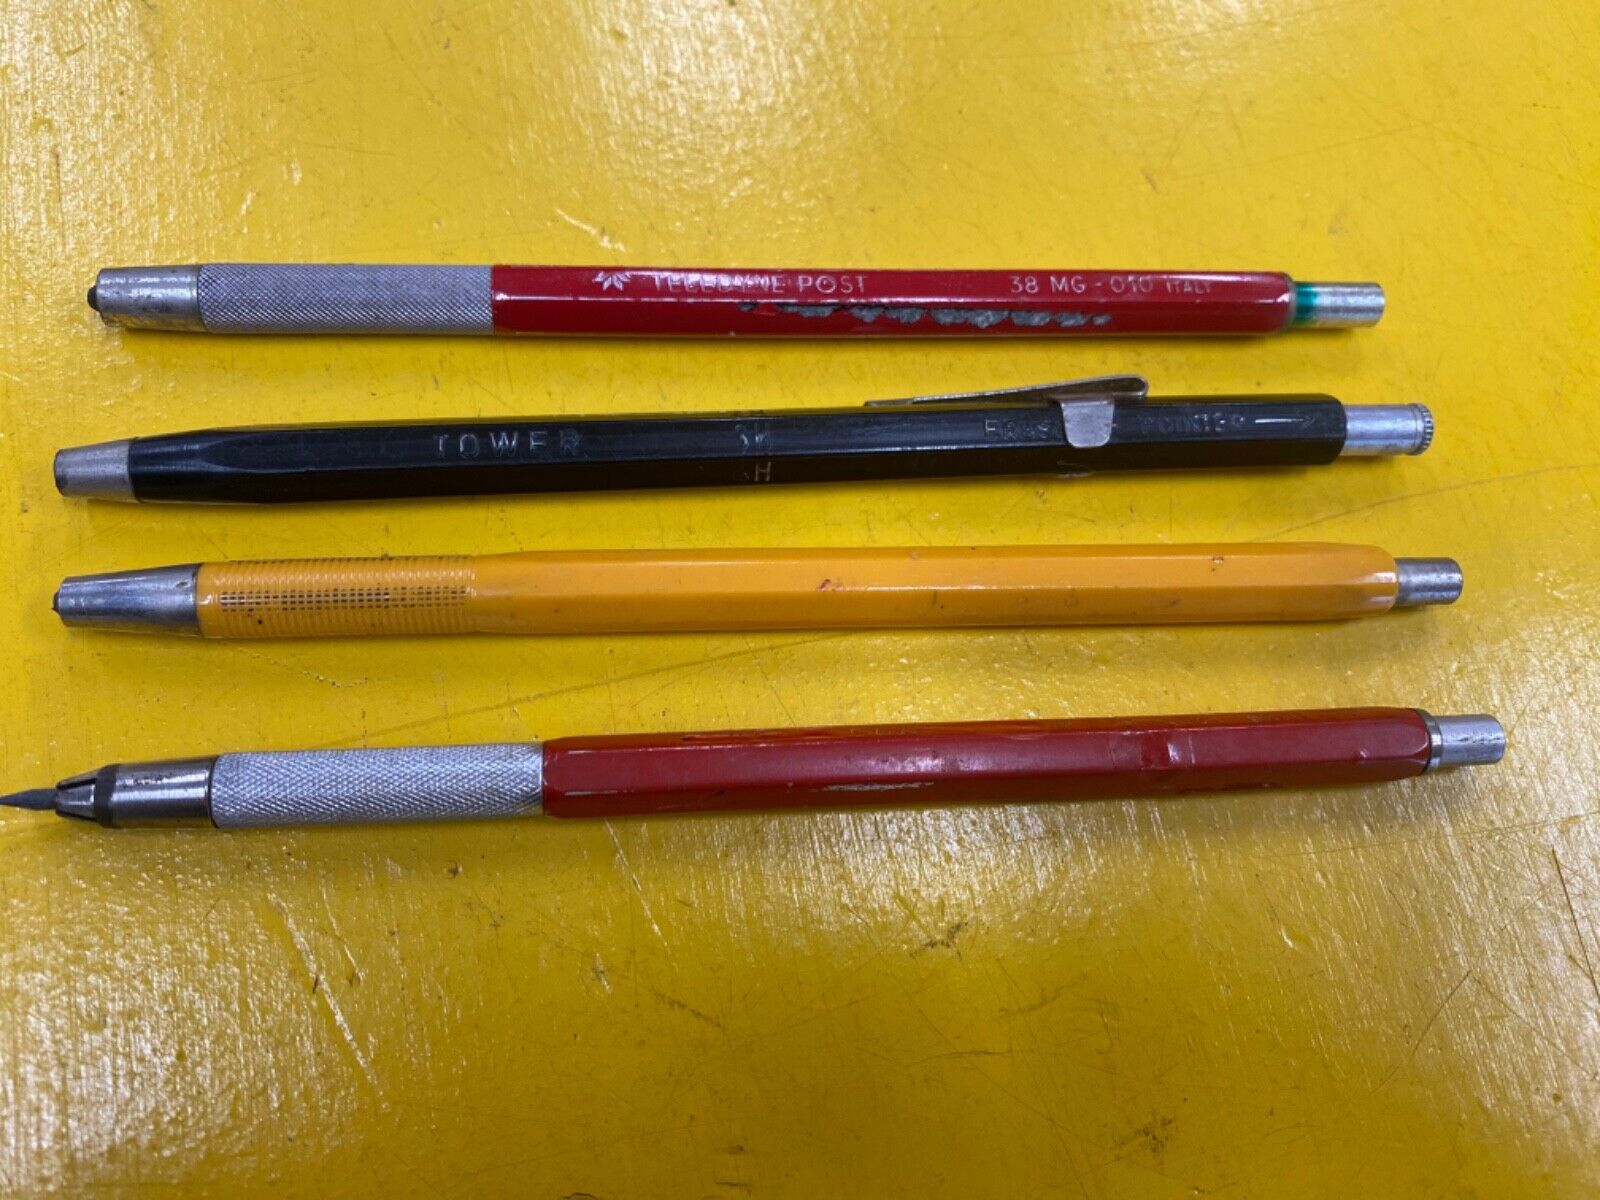 Vintage TELEDYNE POST Drafting Pencils & others Germany architect drawing